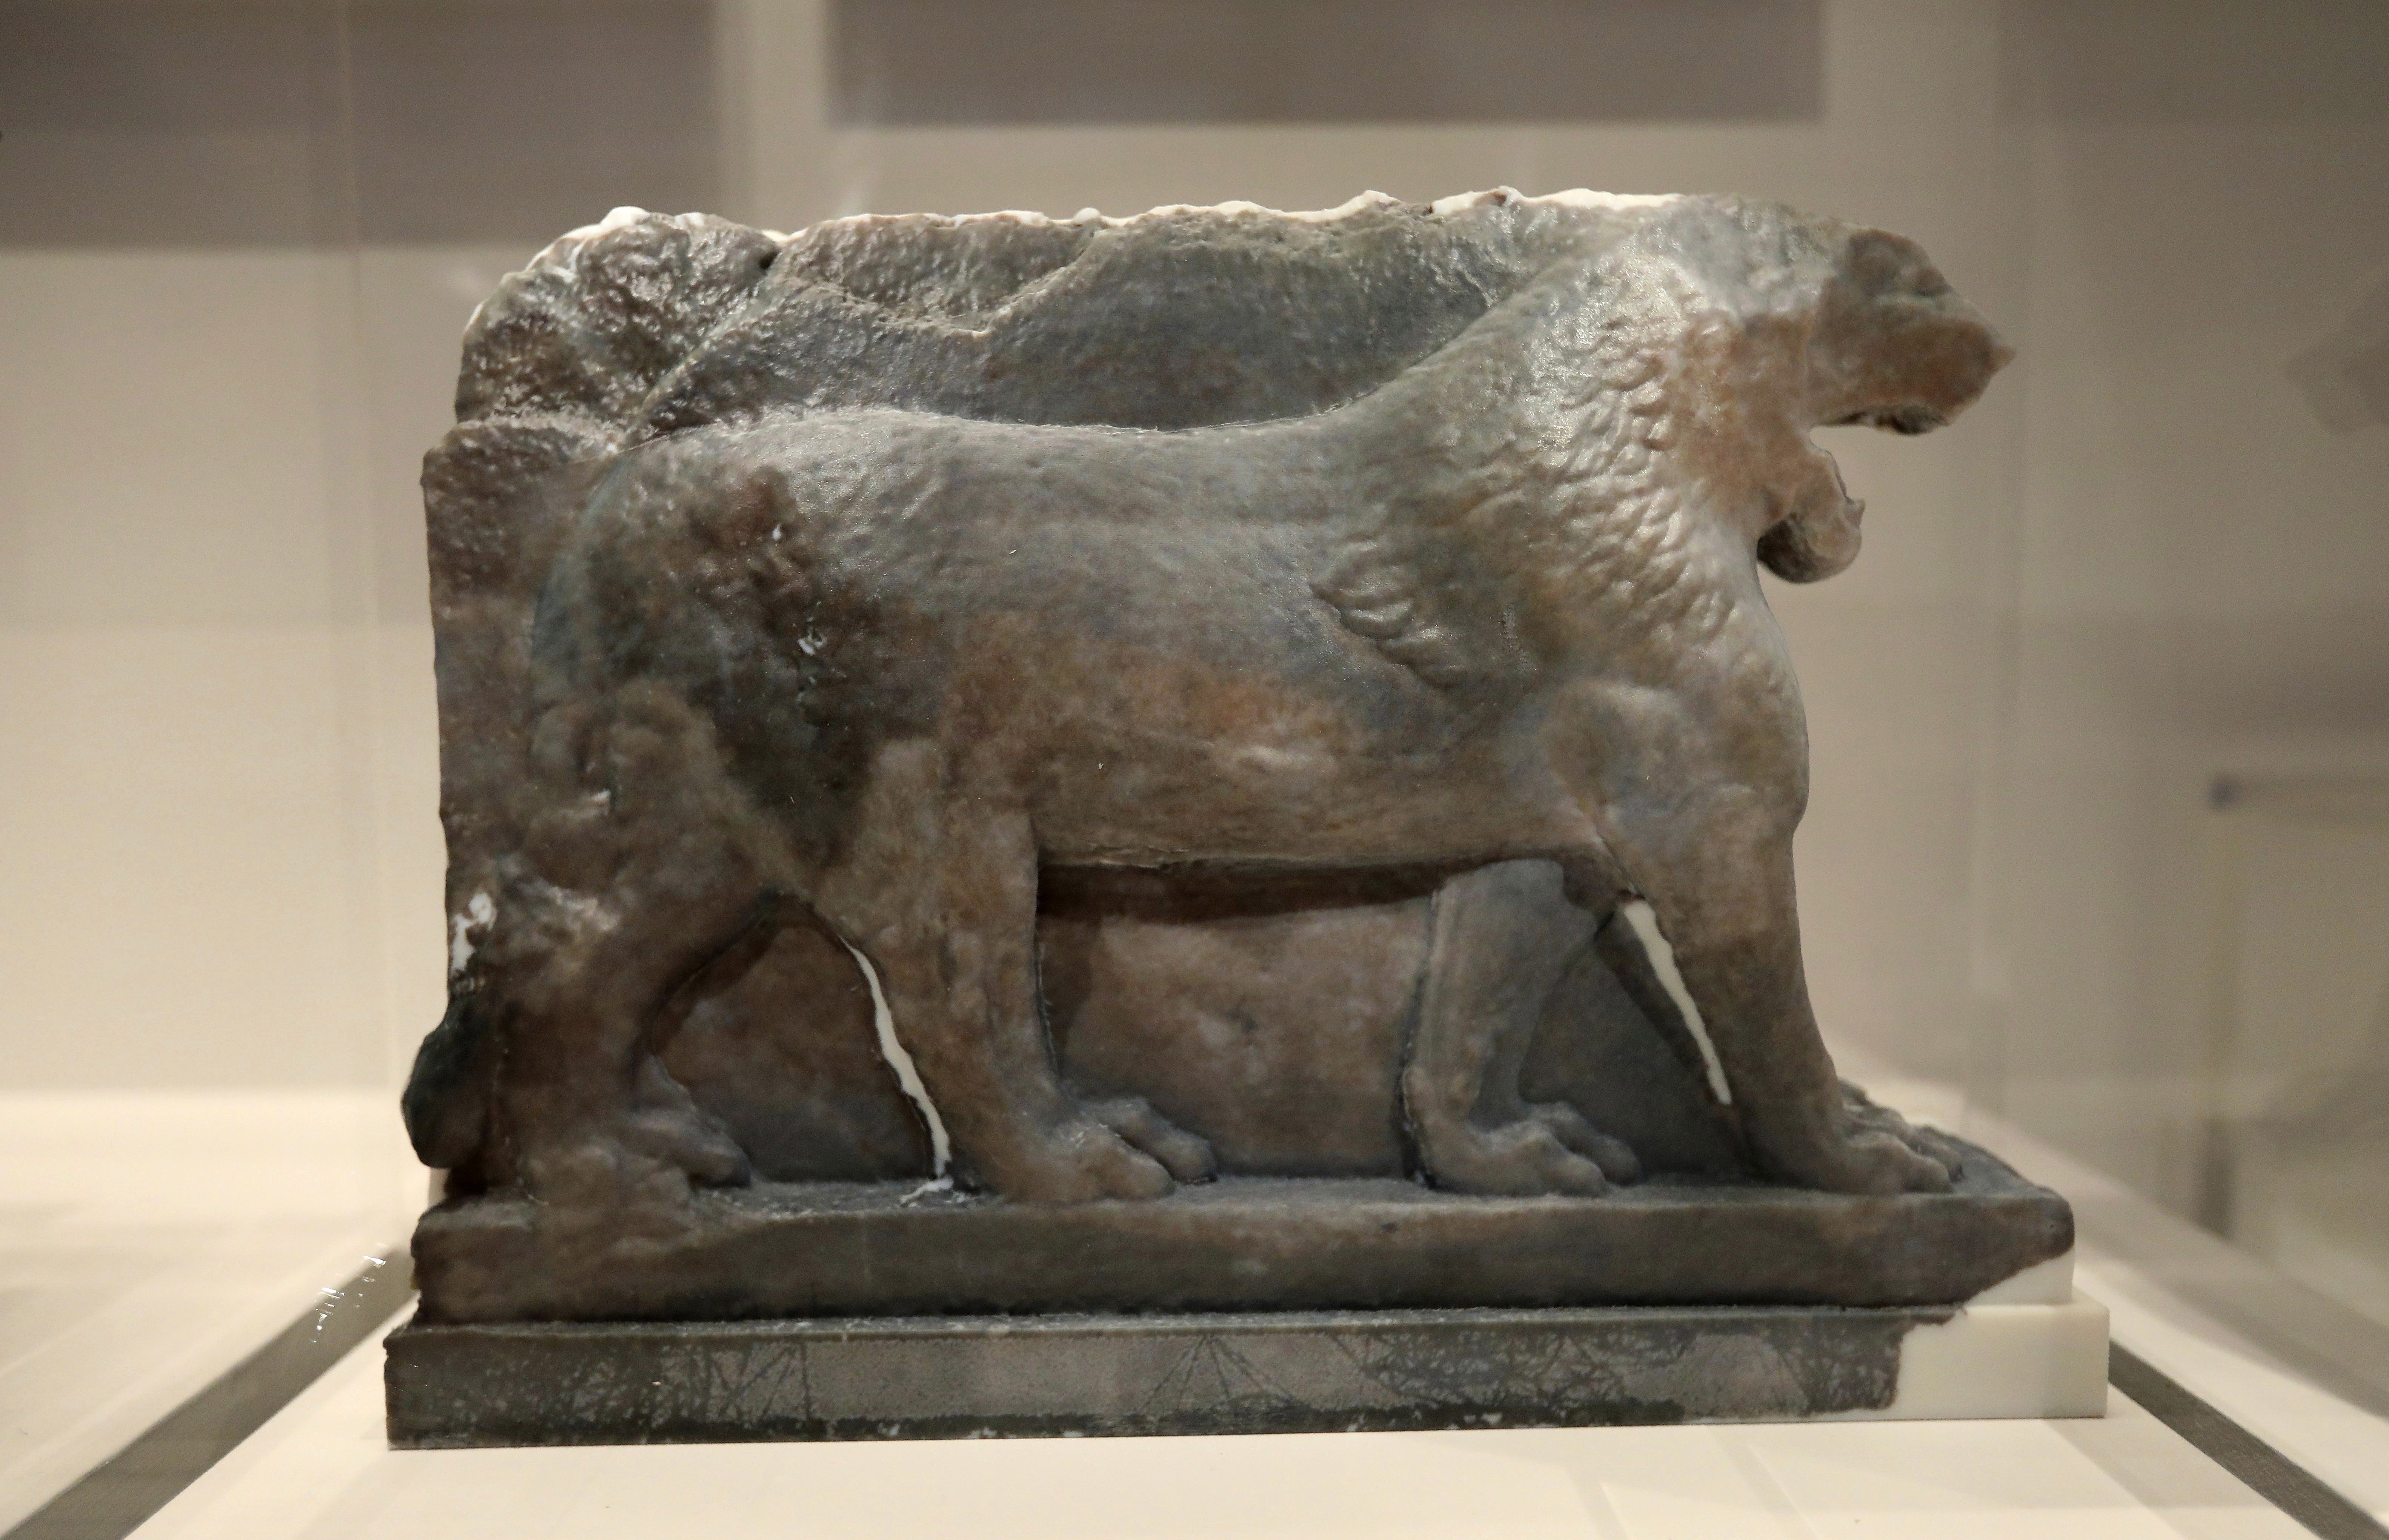 A 3D-printed recreation of the ancient Lion of Mosul displayed at the Imperial War Museum in London. Photo: AP